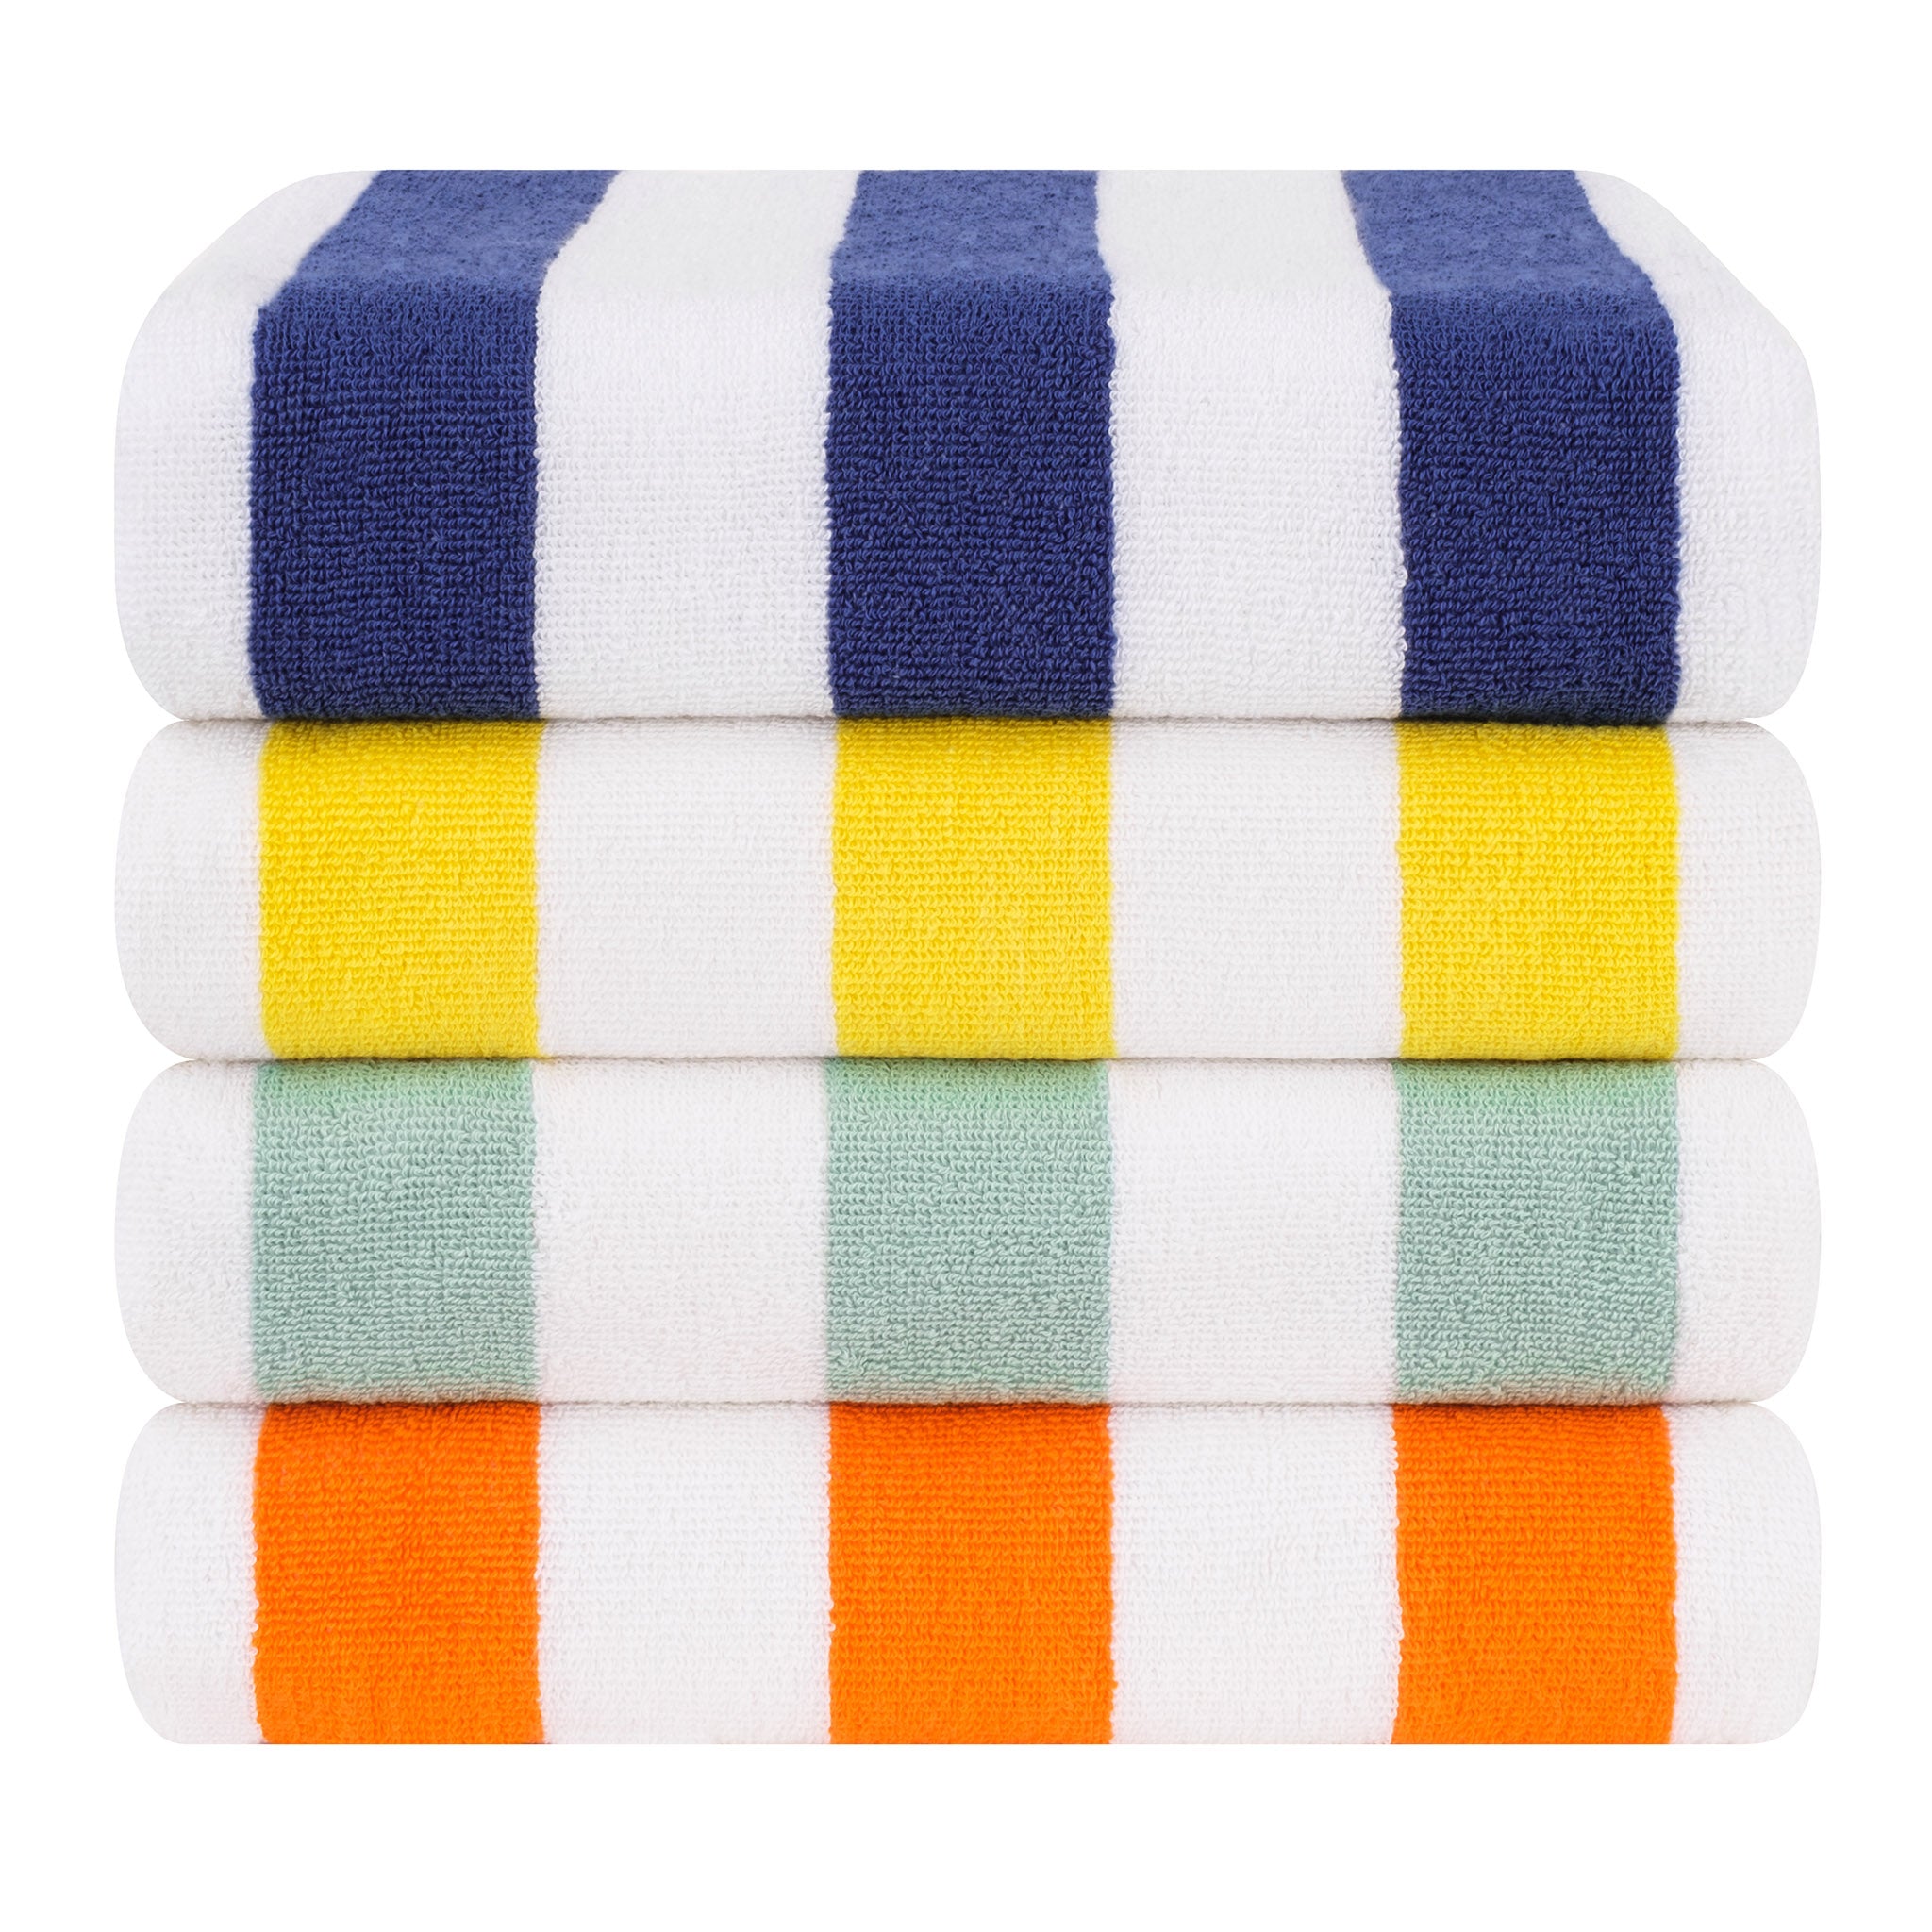 4 Pack of Cabana Beach Towels Extra Large 30x70 Soft Cotton Towel Set  Perfect Pool Towel or Beach Towel Striped Color Options 